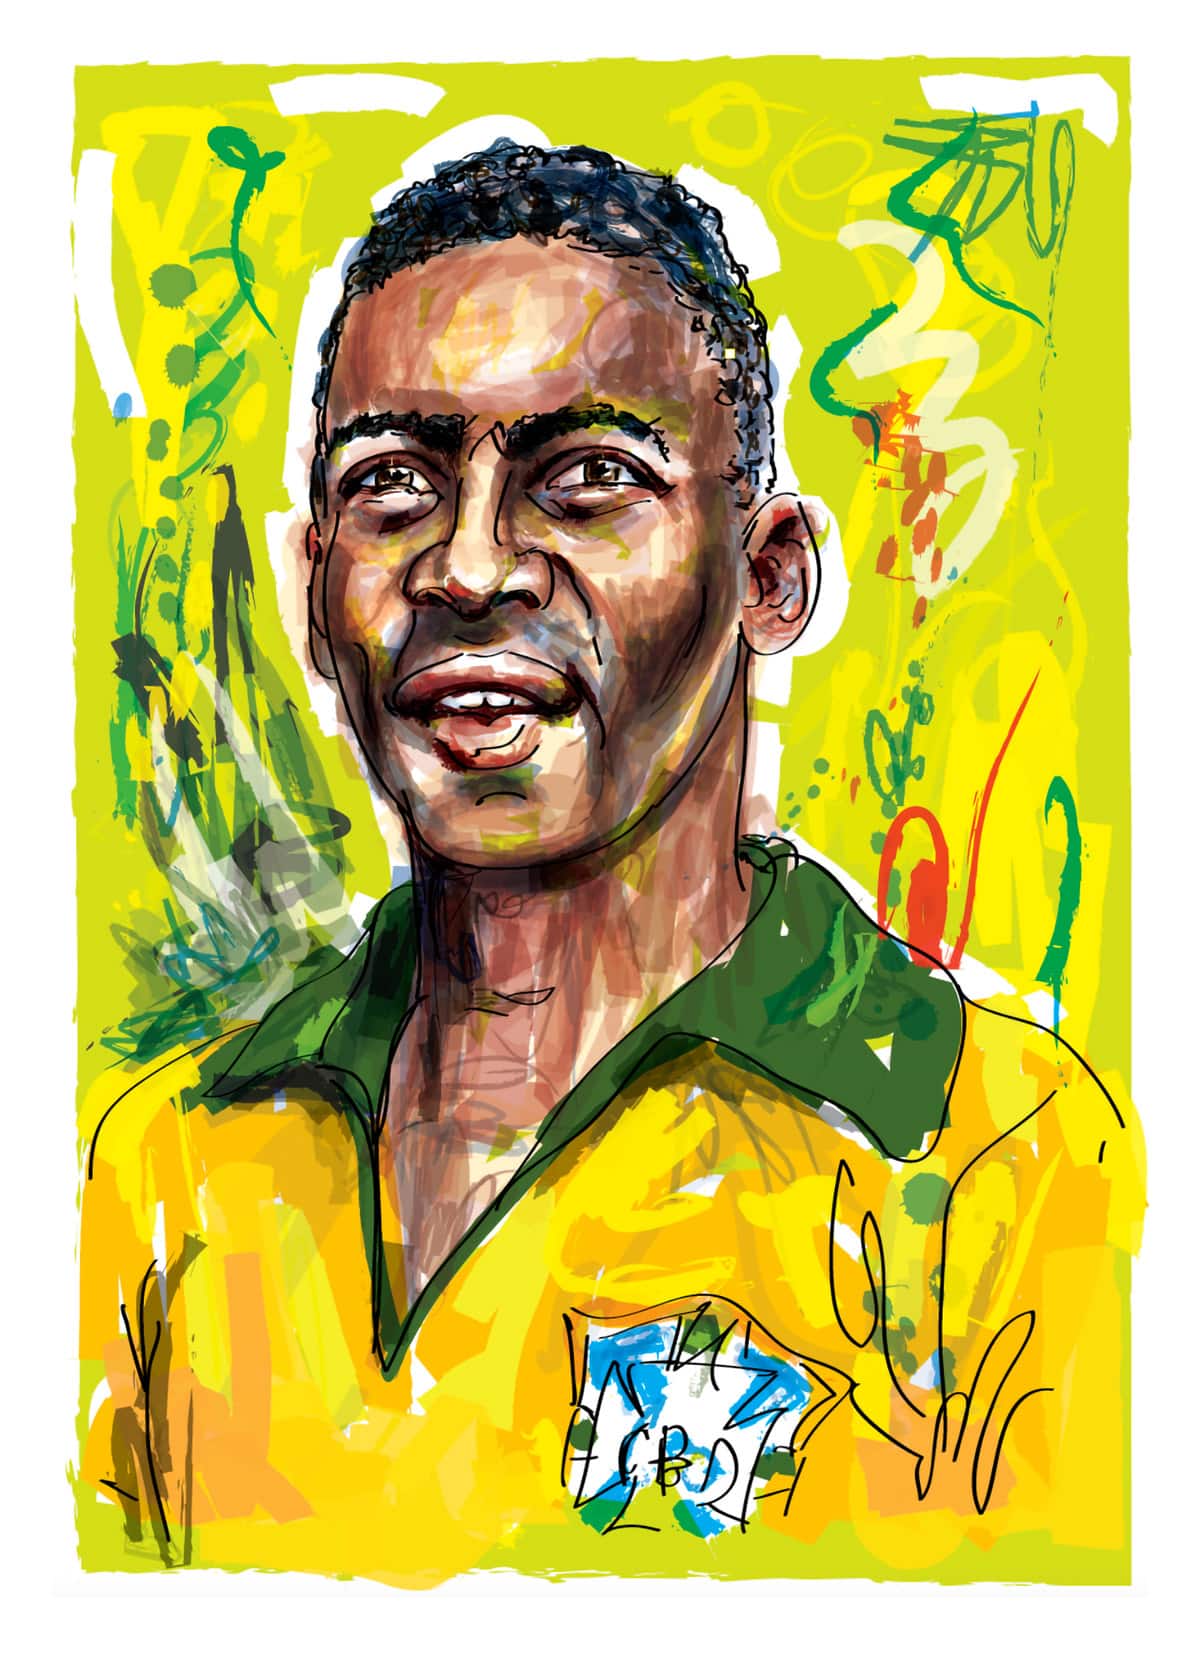 Portraits of Pele by nick oldham